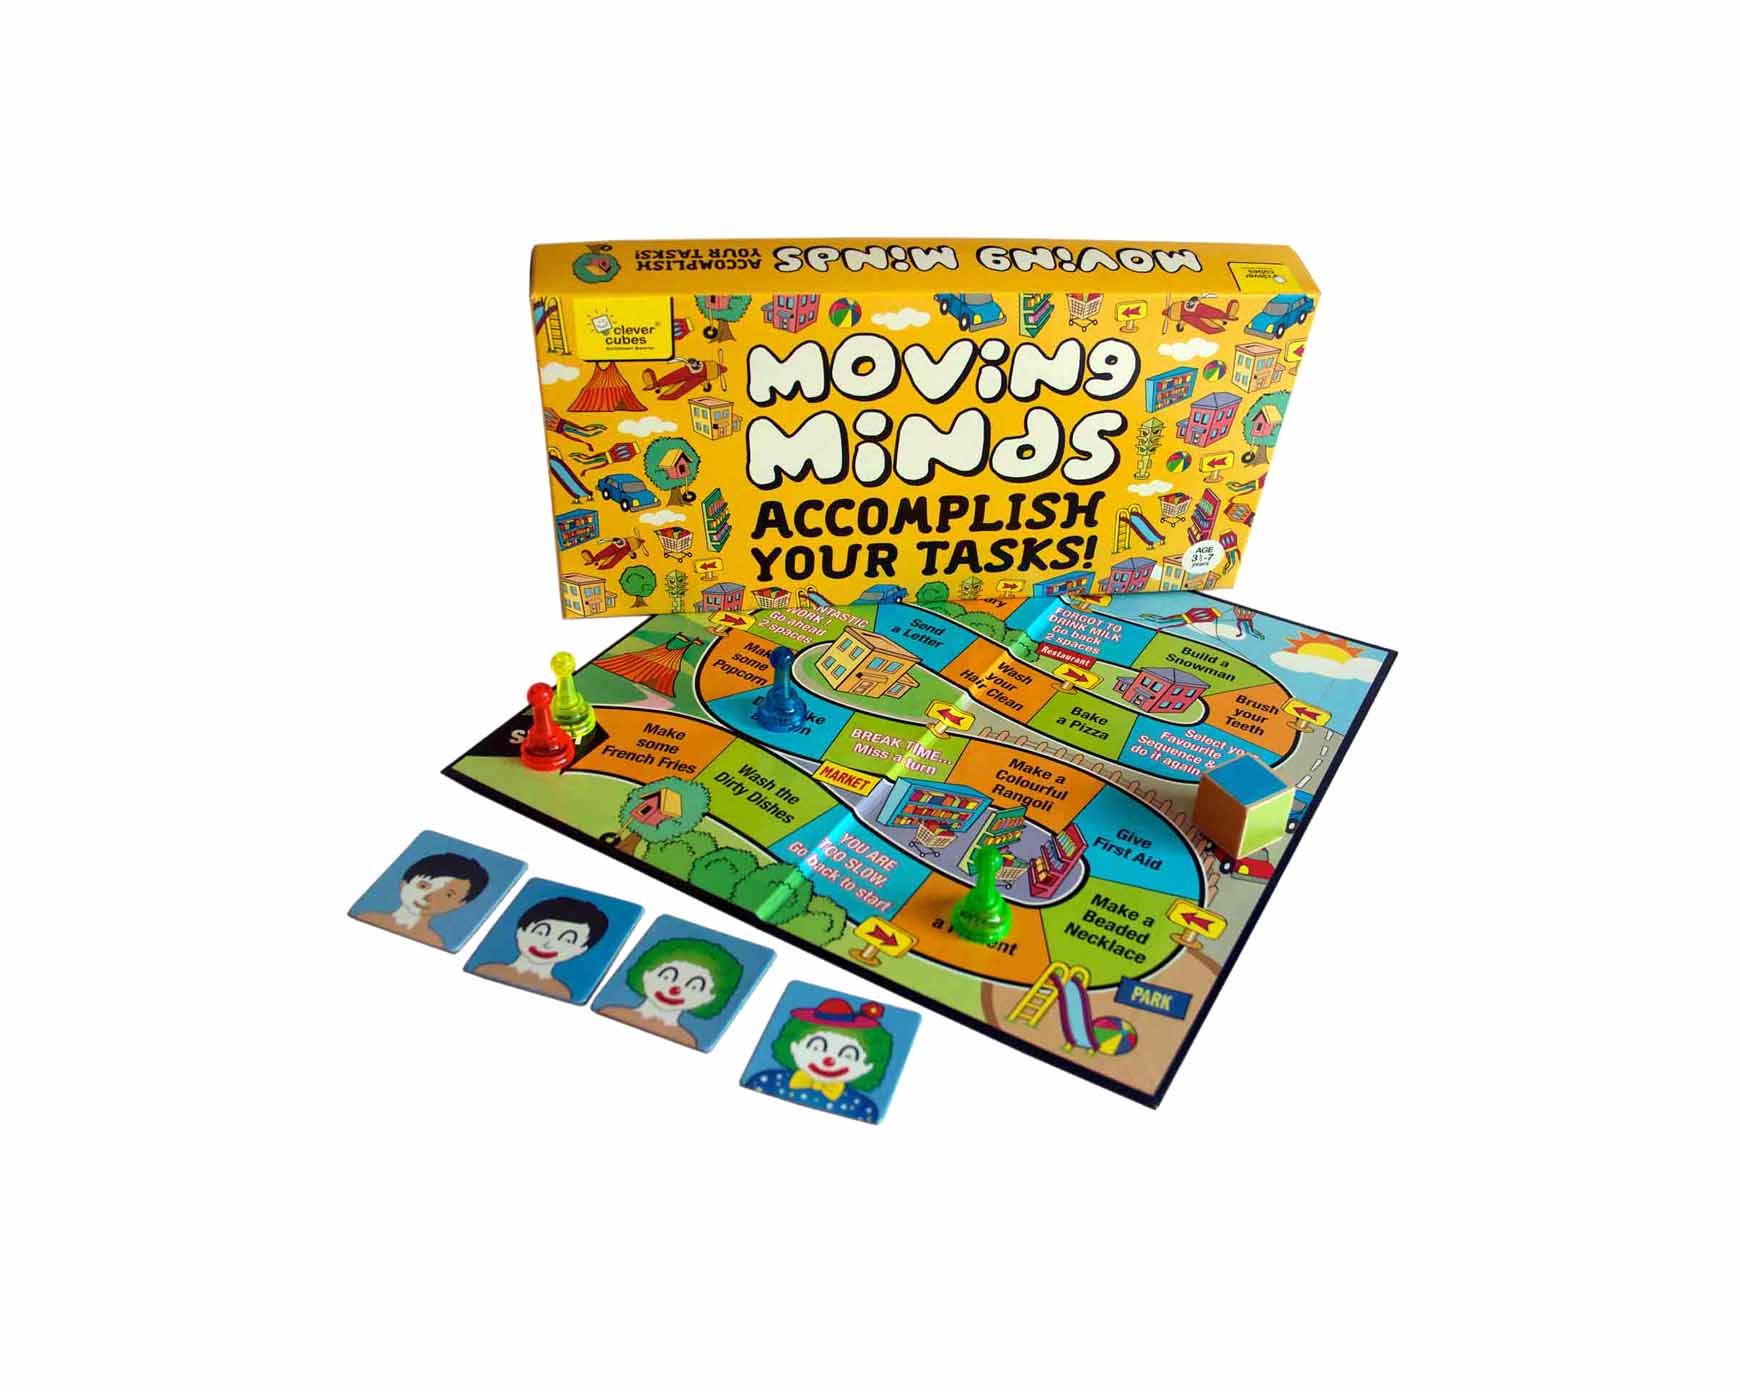 MOVING-MINDS